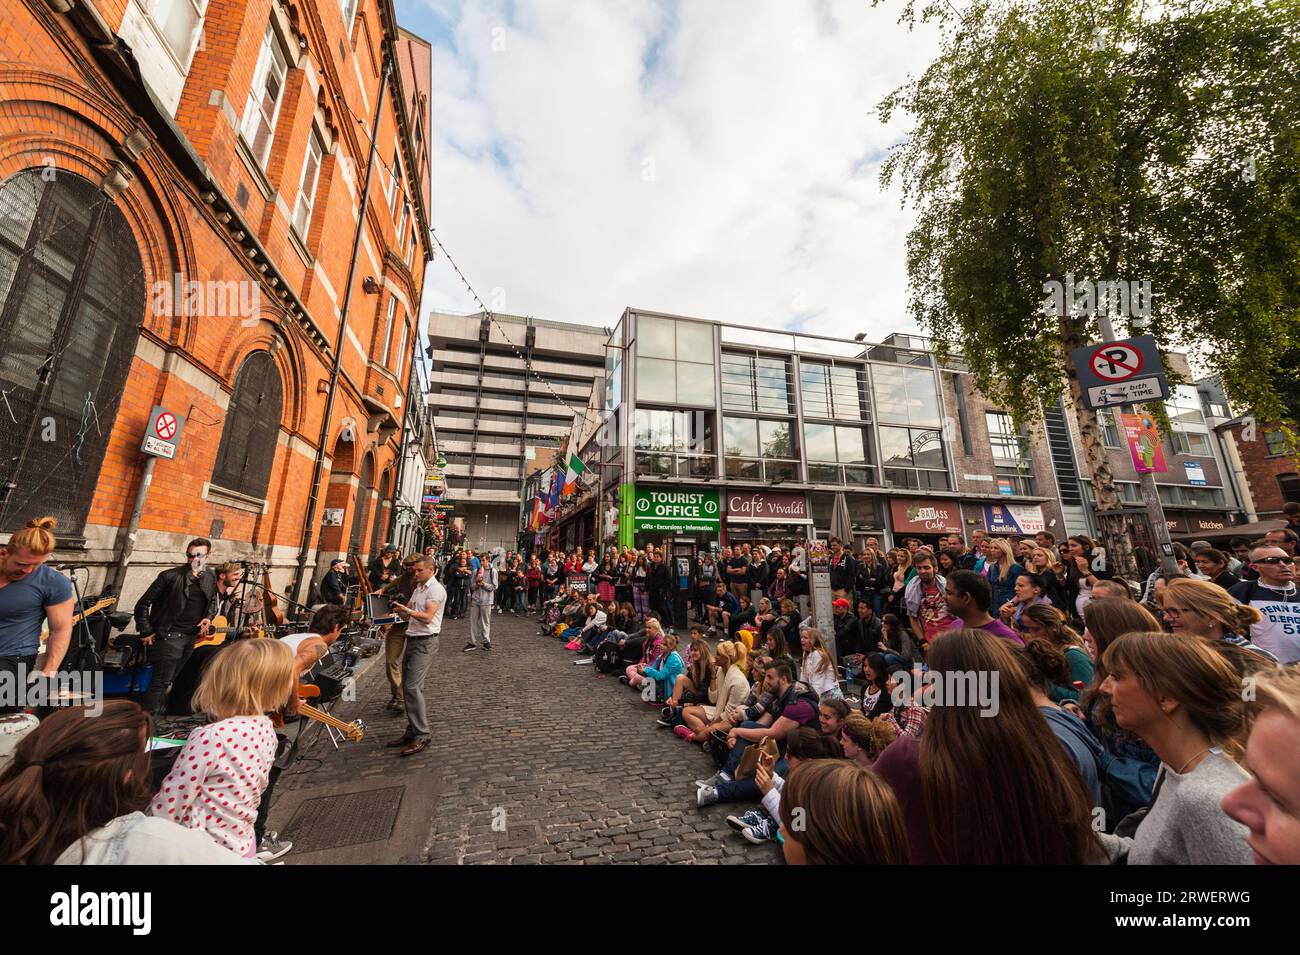 Dublin, Ireland - August 16, 2015  Improvised concert in Dublin Temple Bar with a crowd of people sitting and standing on the square 's steps by the e Stock Photo